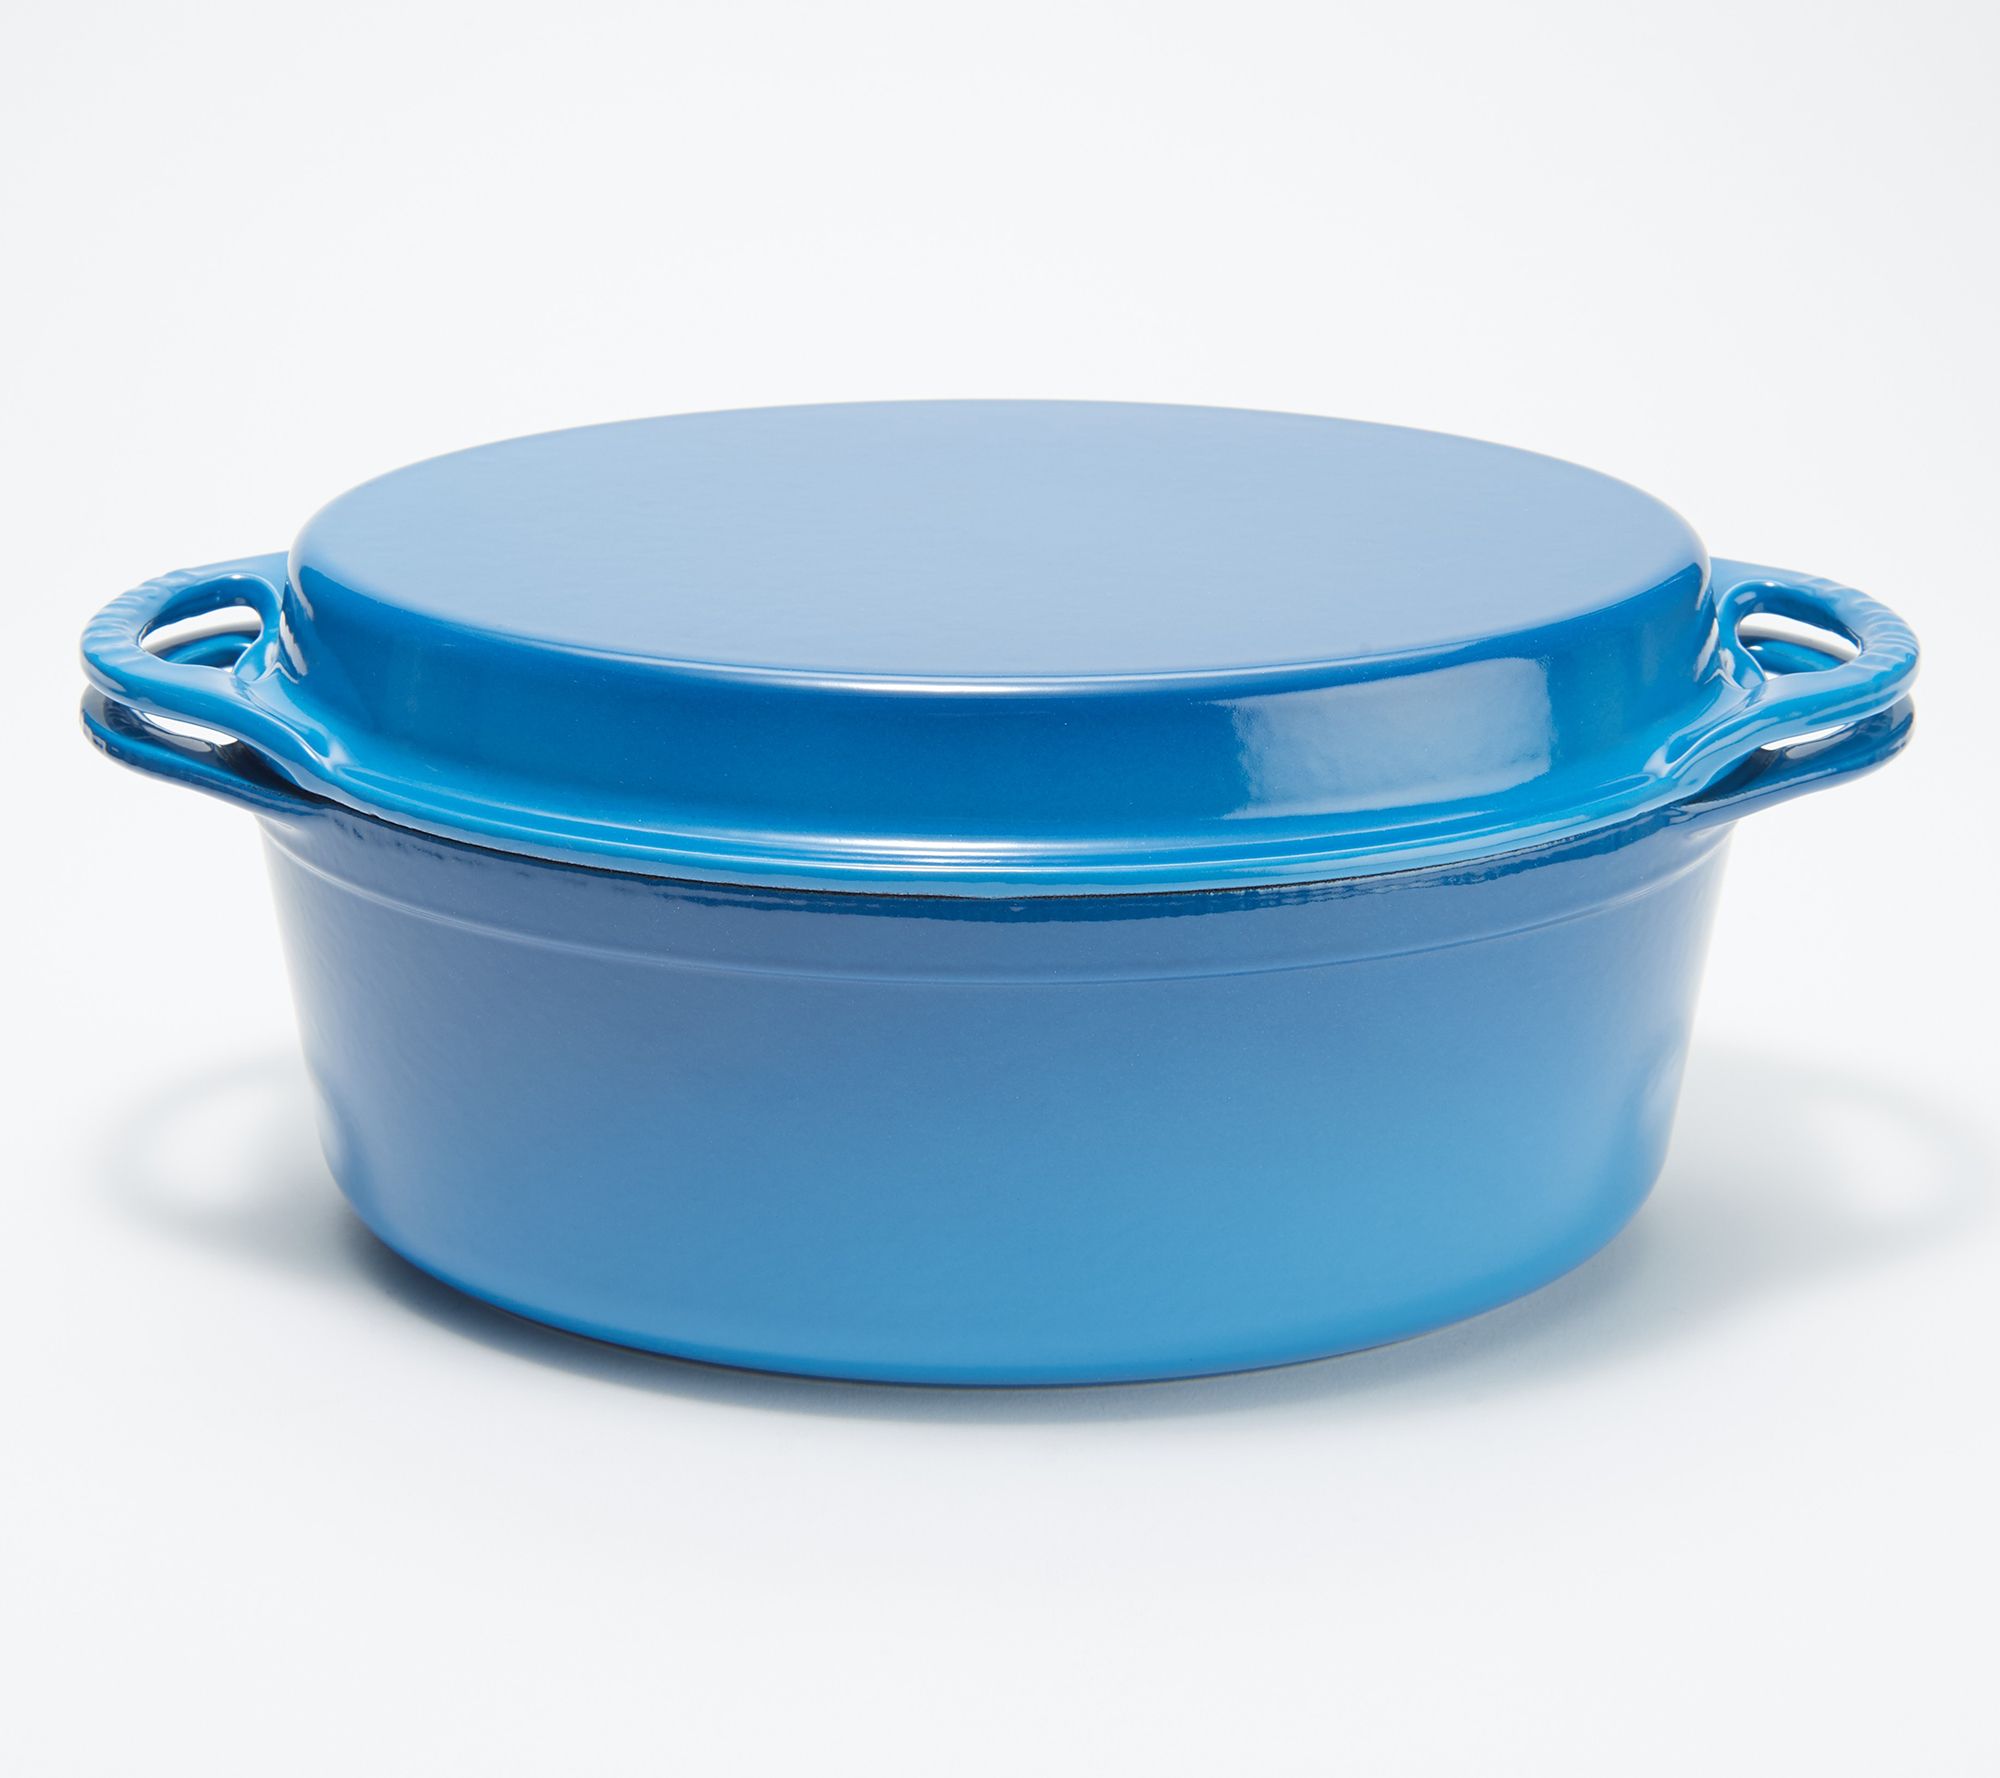 Le Creuset 4.75-qt Cast-Iron Oval Oven with Grill Pan Lid - QVC.com